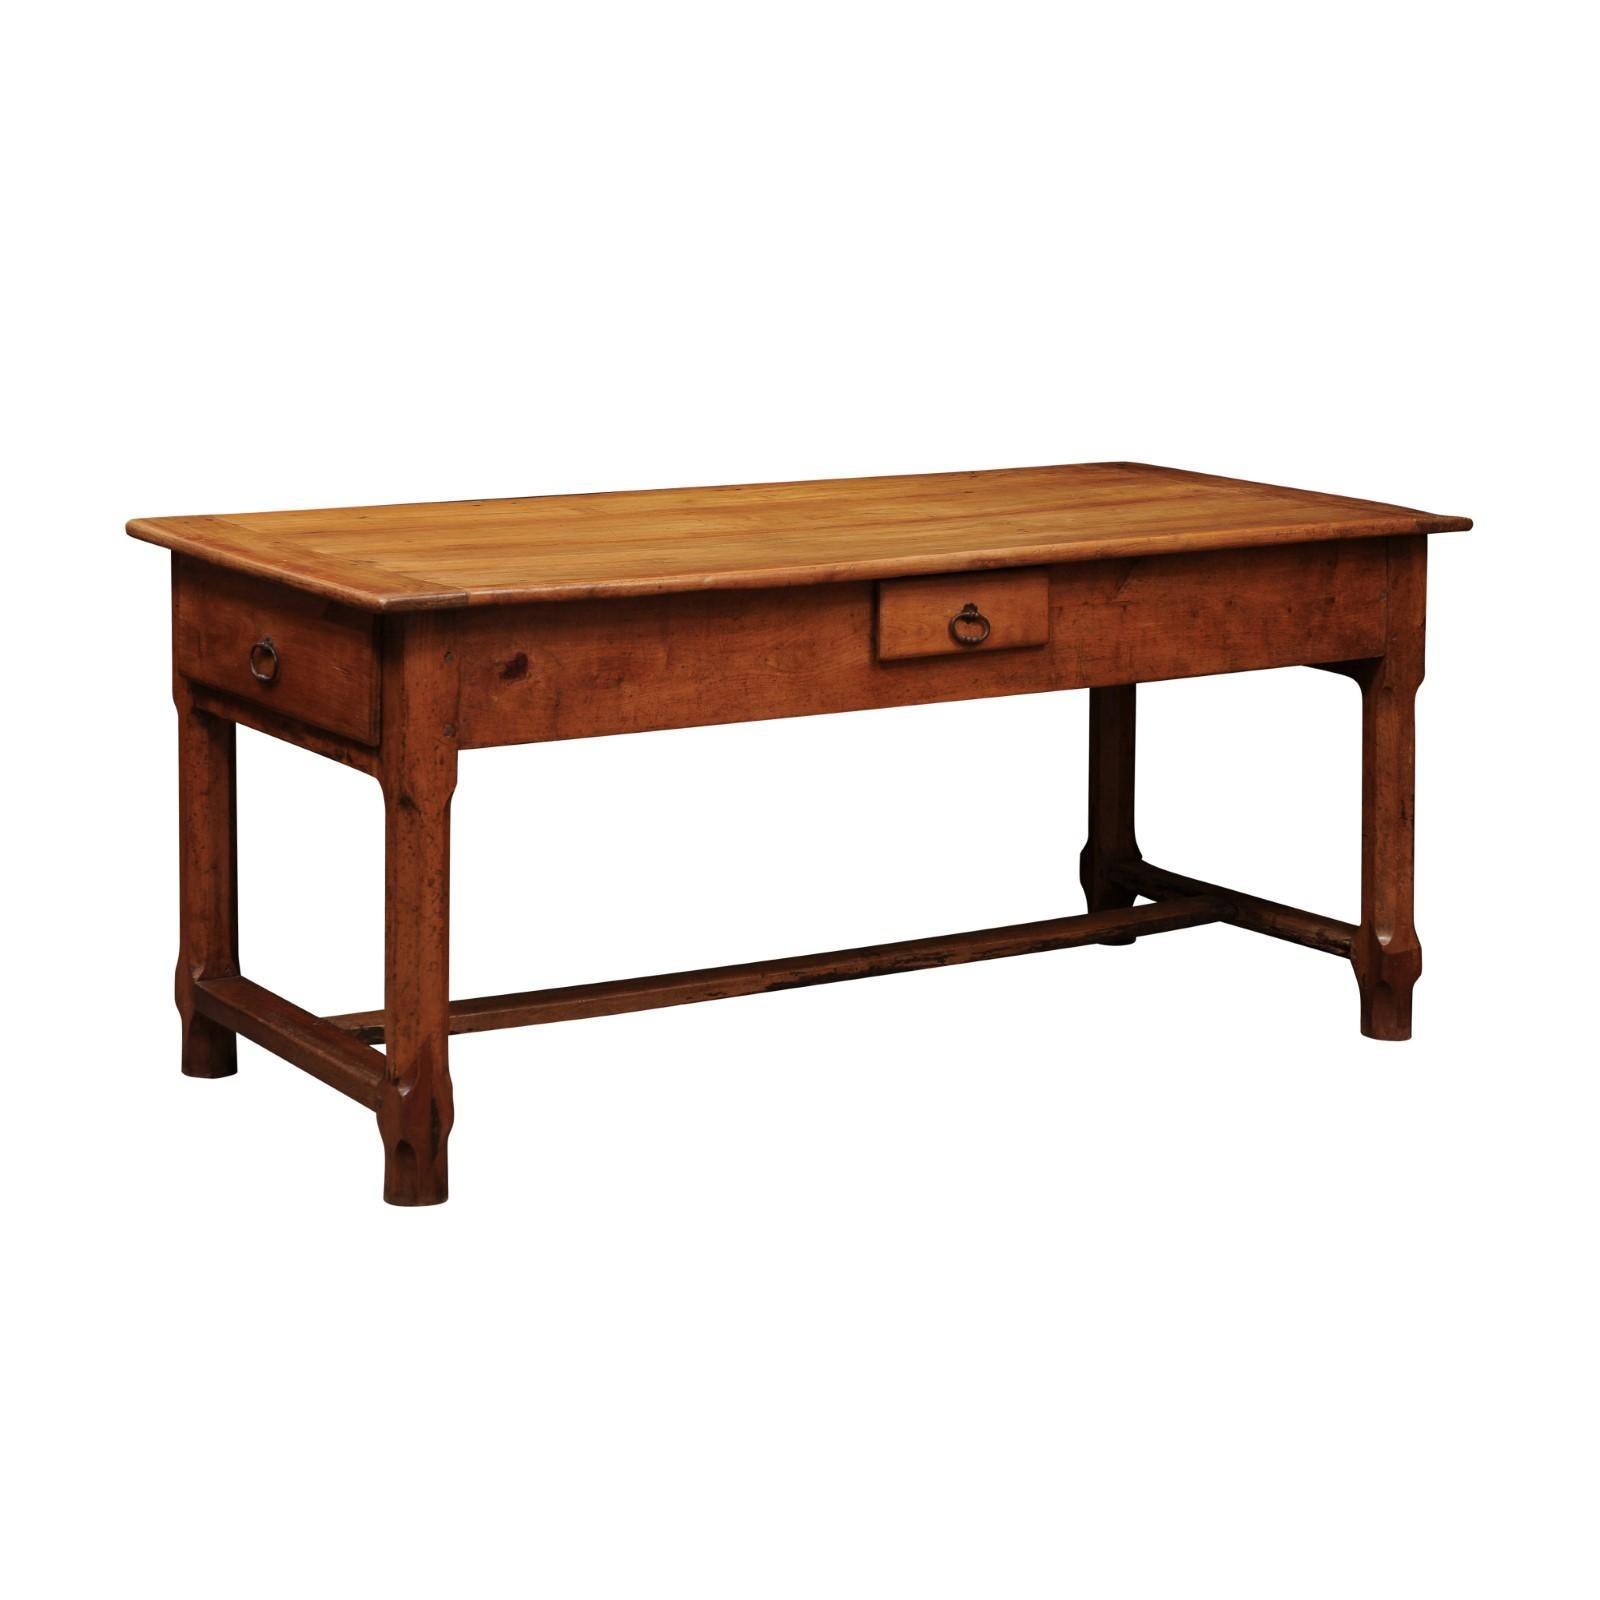 French Fruitwood Farm Table with 3 Drawers and H-Form Stretcher, 18th Century & later